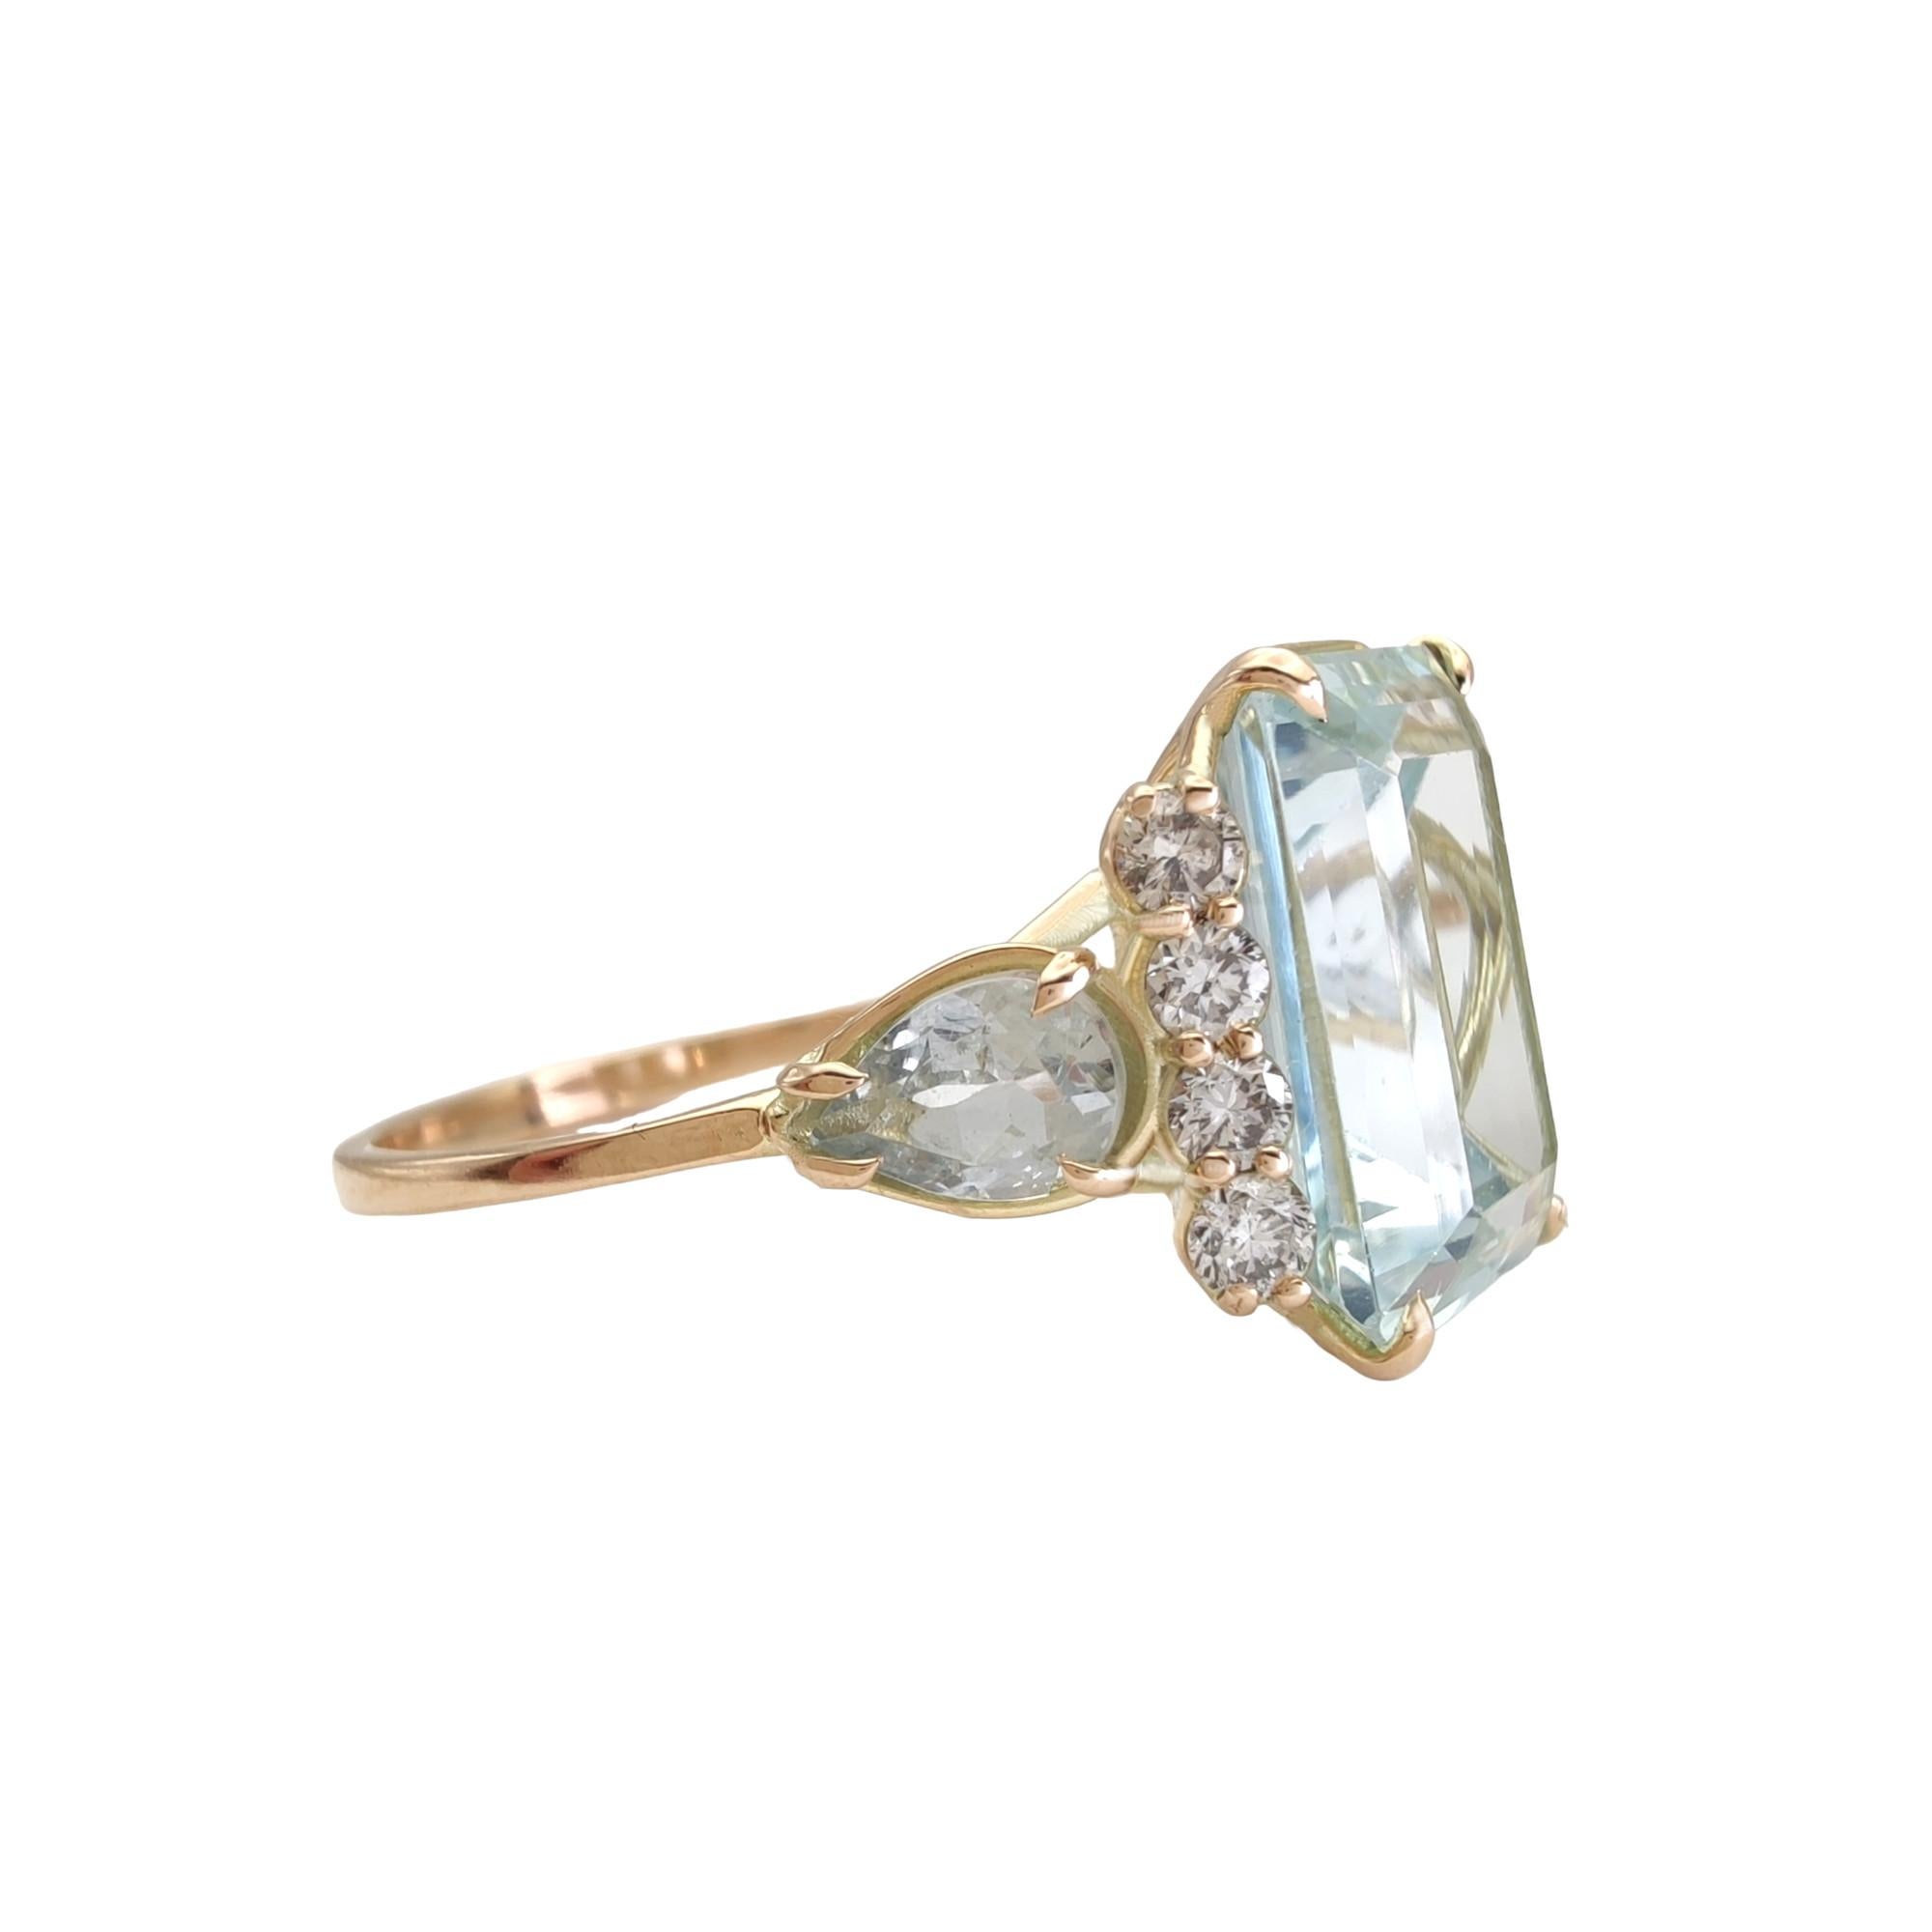 Women's 14K Gold Ring Aquamarine and Diamonds Perfect for Proposals Engagements 7